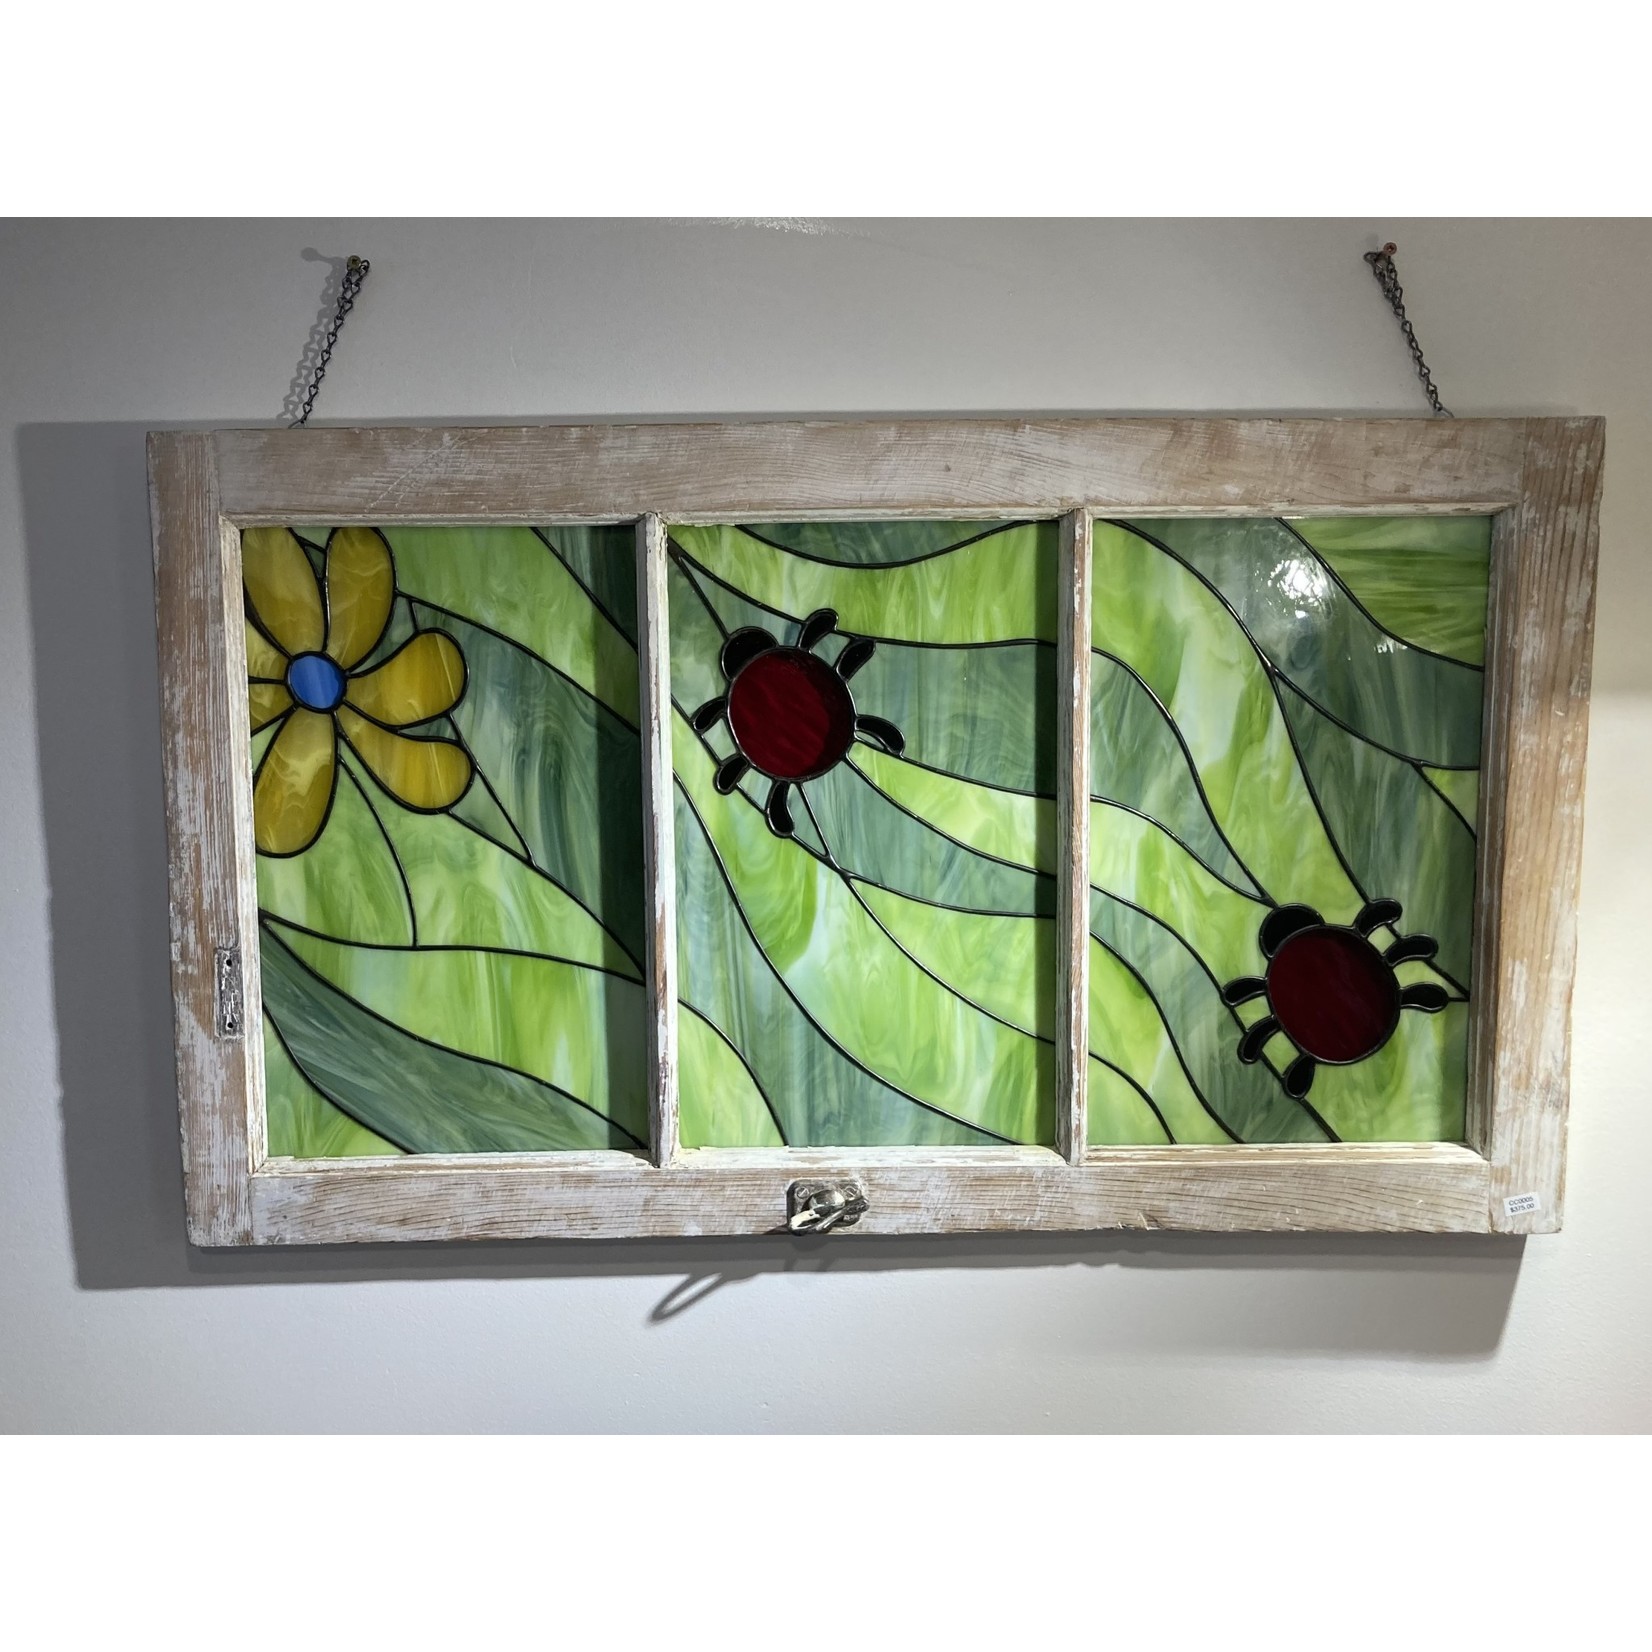 Cleo's Creations Stained Glass Window Frame with Ladybugs